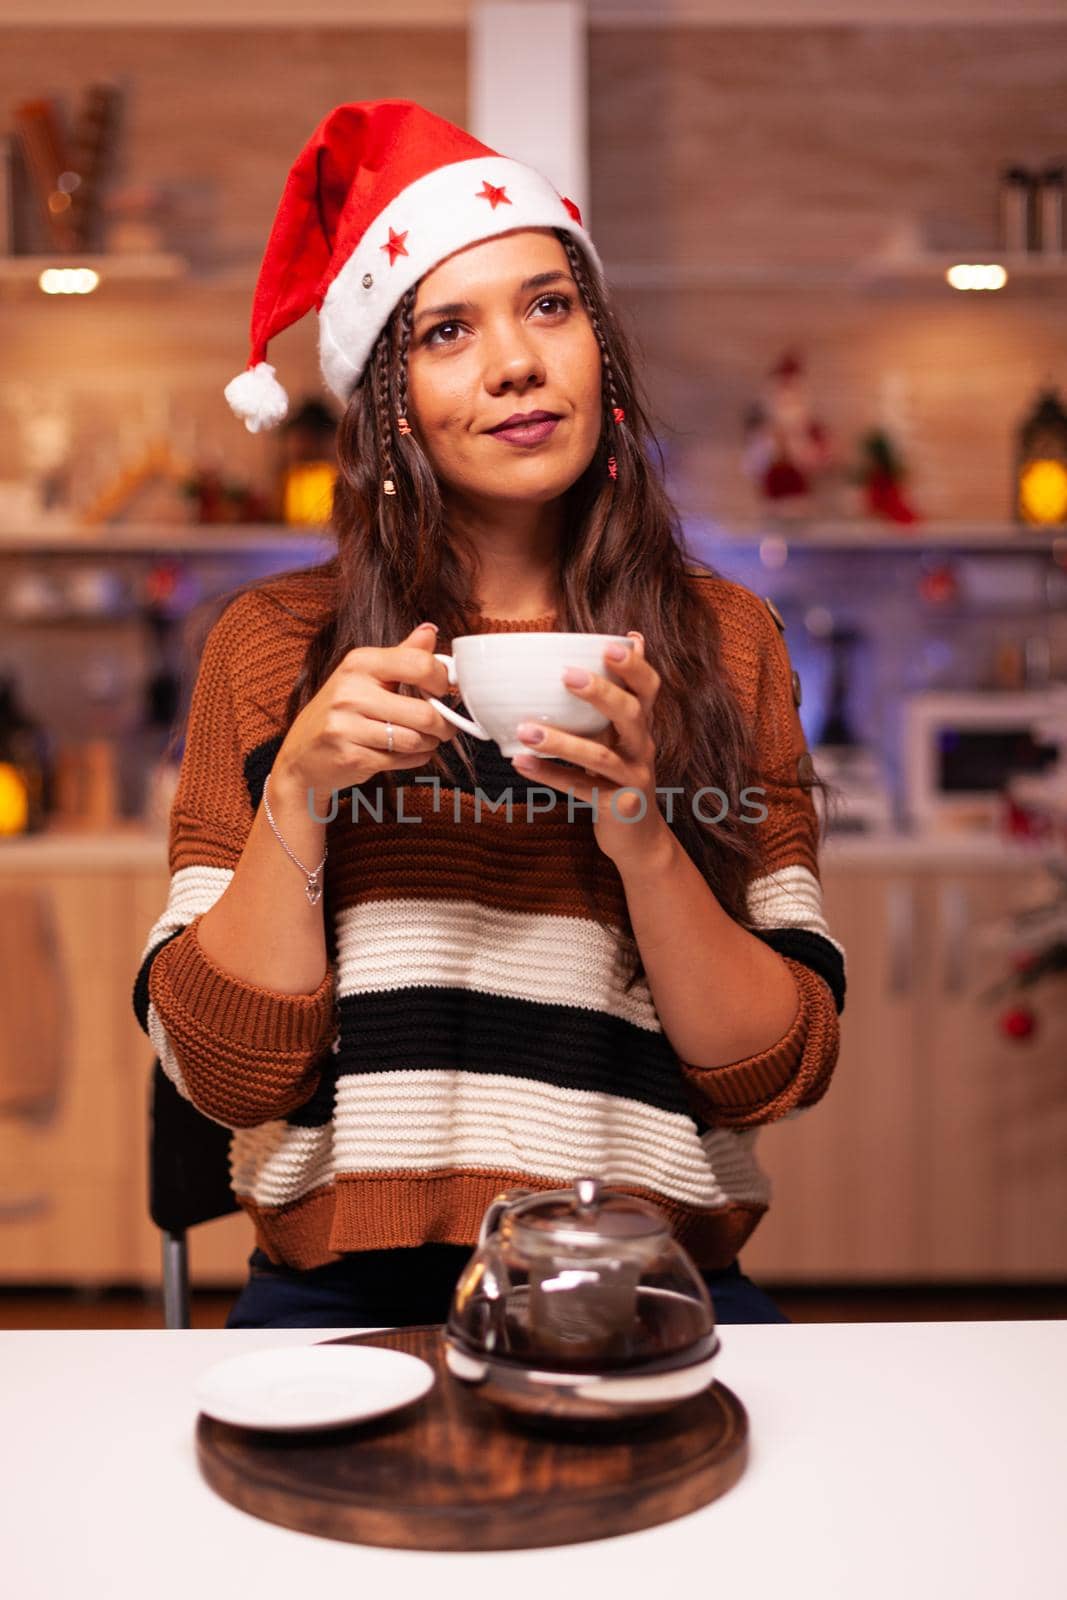 Portrait of caucasian woman with santa hat smiling in kitchen decorated with ornaments, lights and tree for christmas season. Cheerful adult thinking about winter celebration dinner